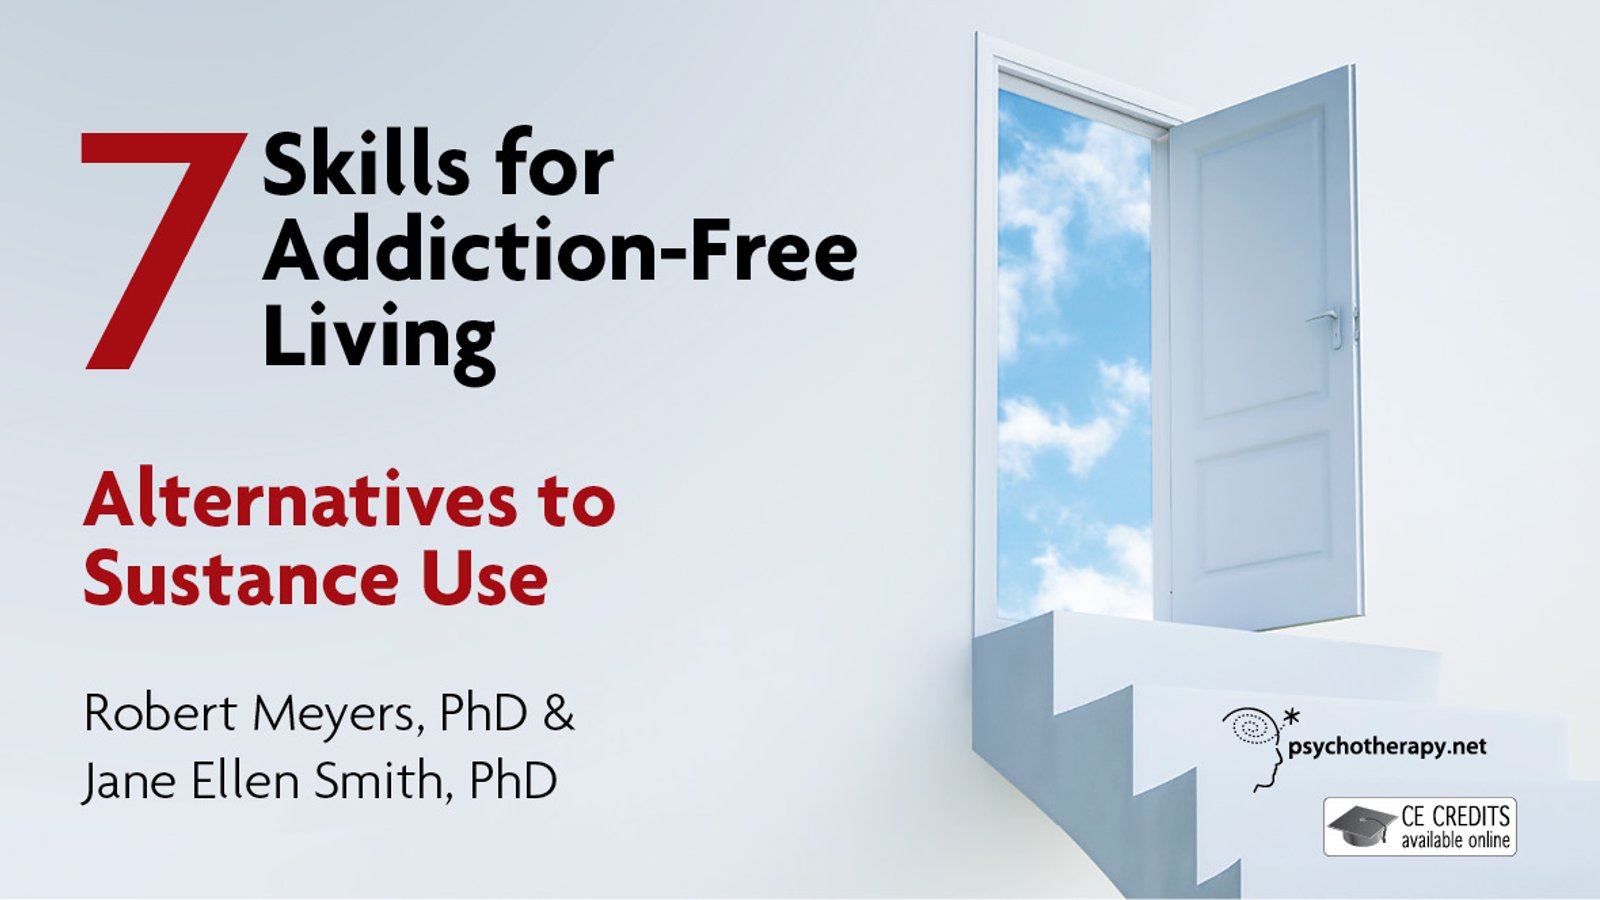 The 7 Skills for Addiction-Free Living Series